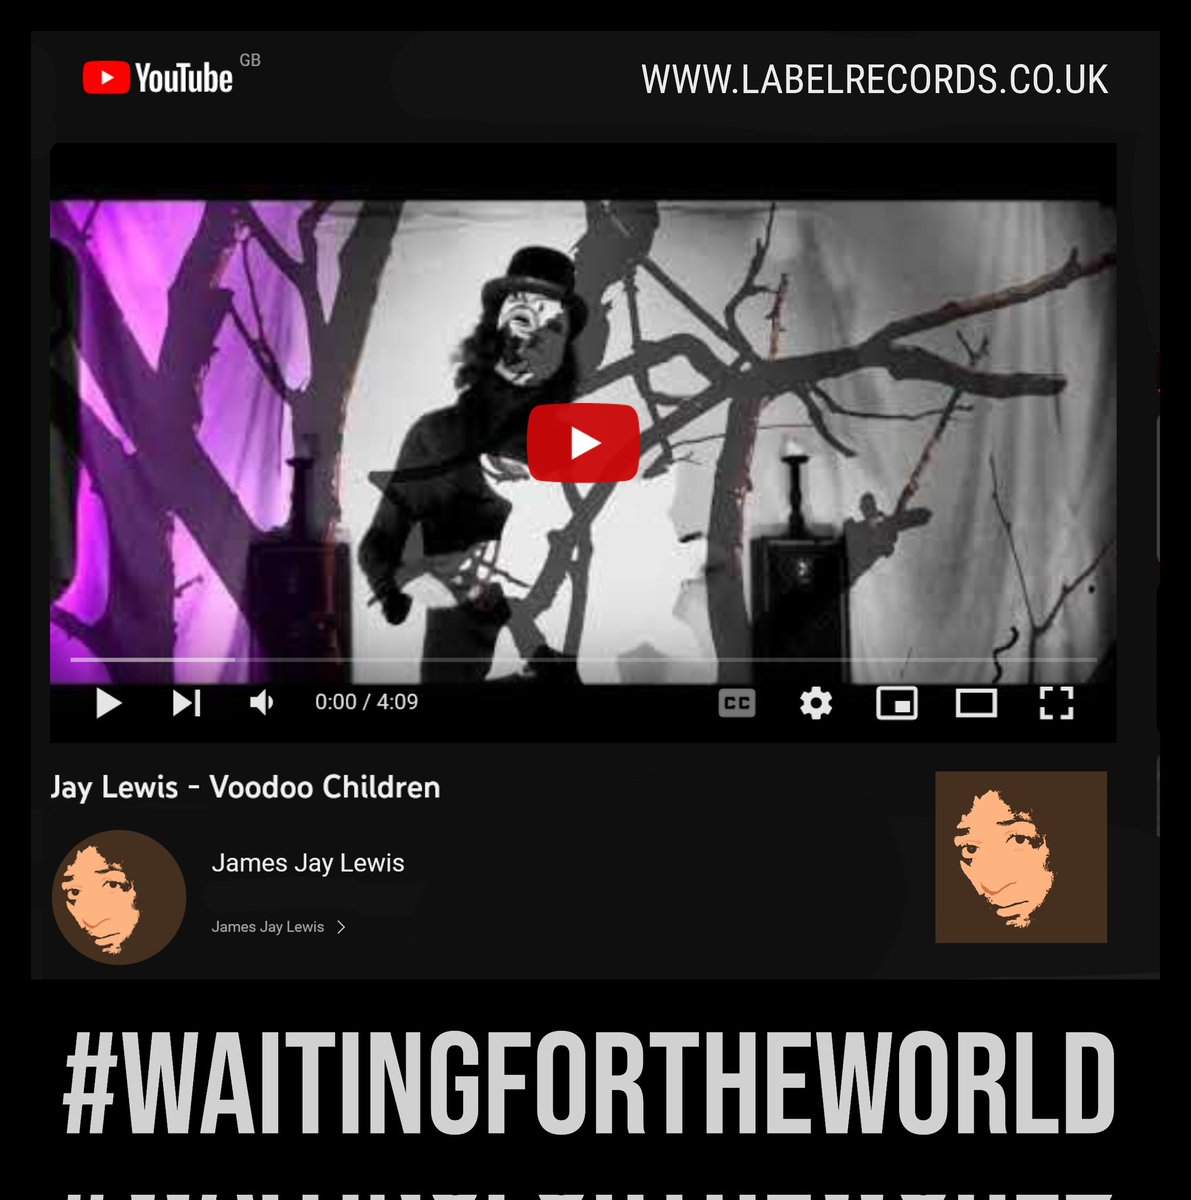 My video for - Voodoo Children is now available to view on YouTube #waitingfortheworld @l_a_b_e_l_ youtube.com/watch?v=Iczm51…